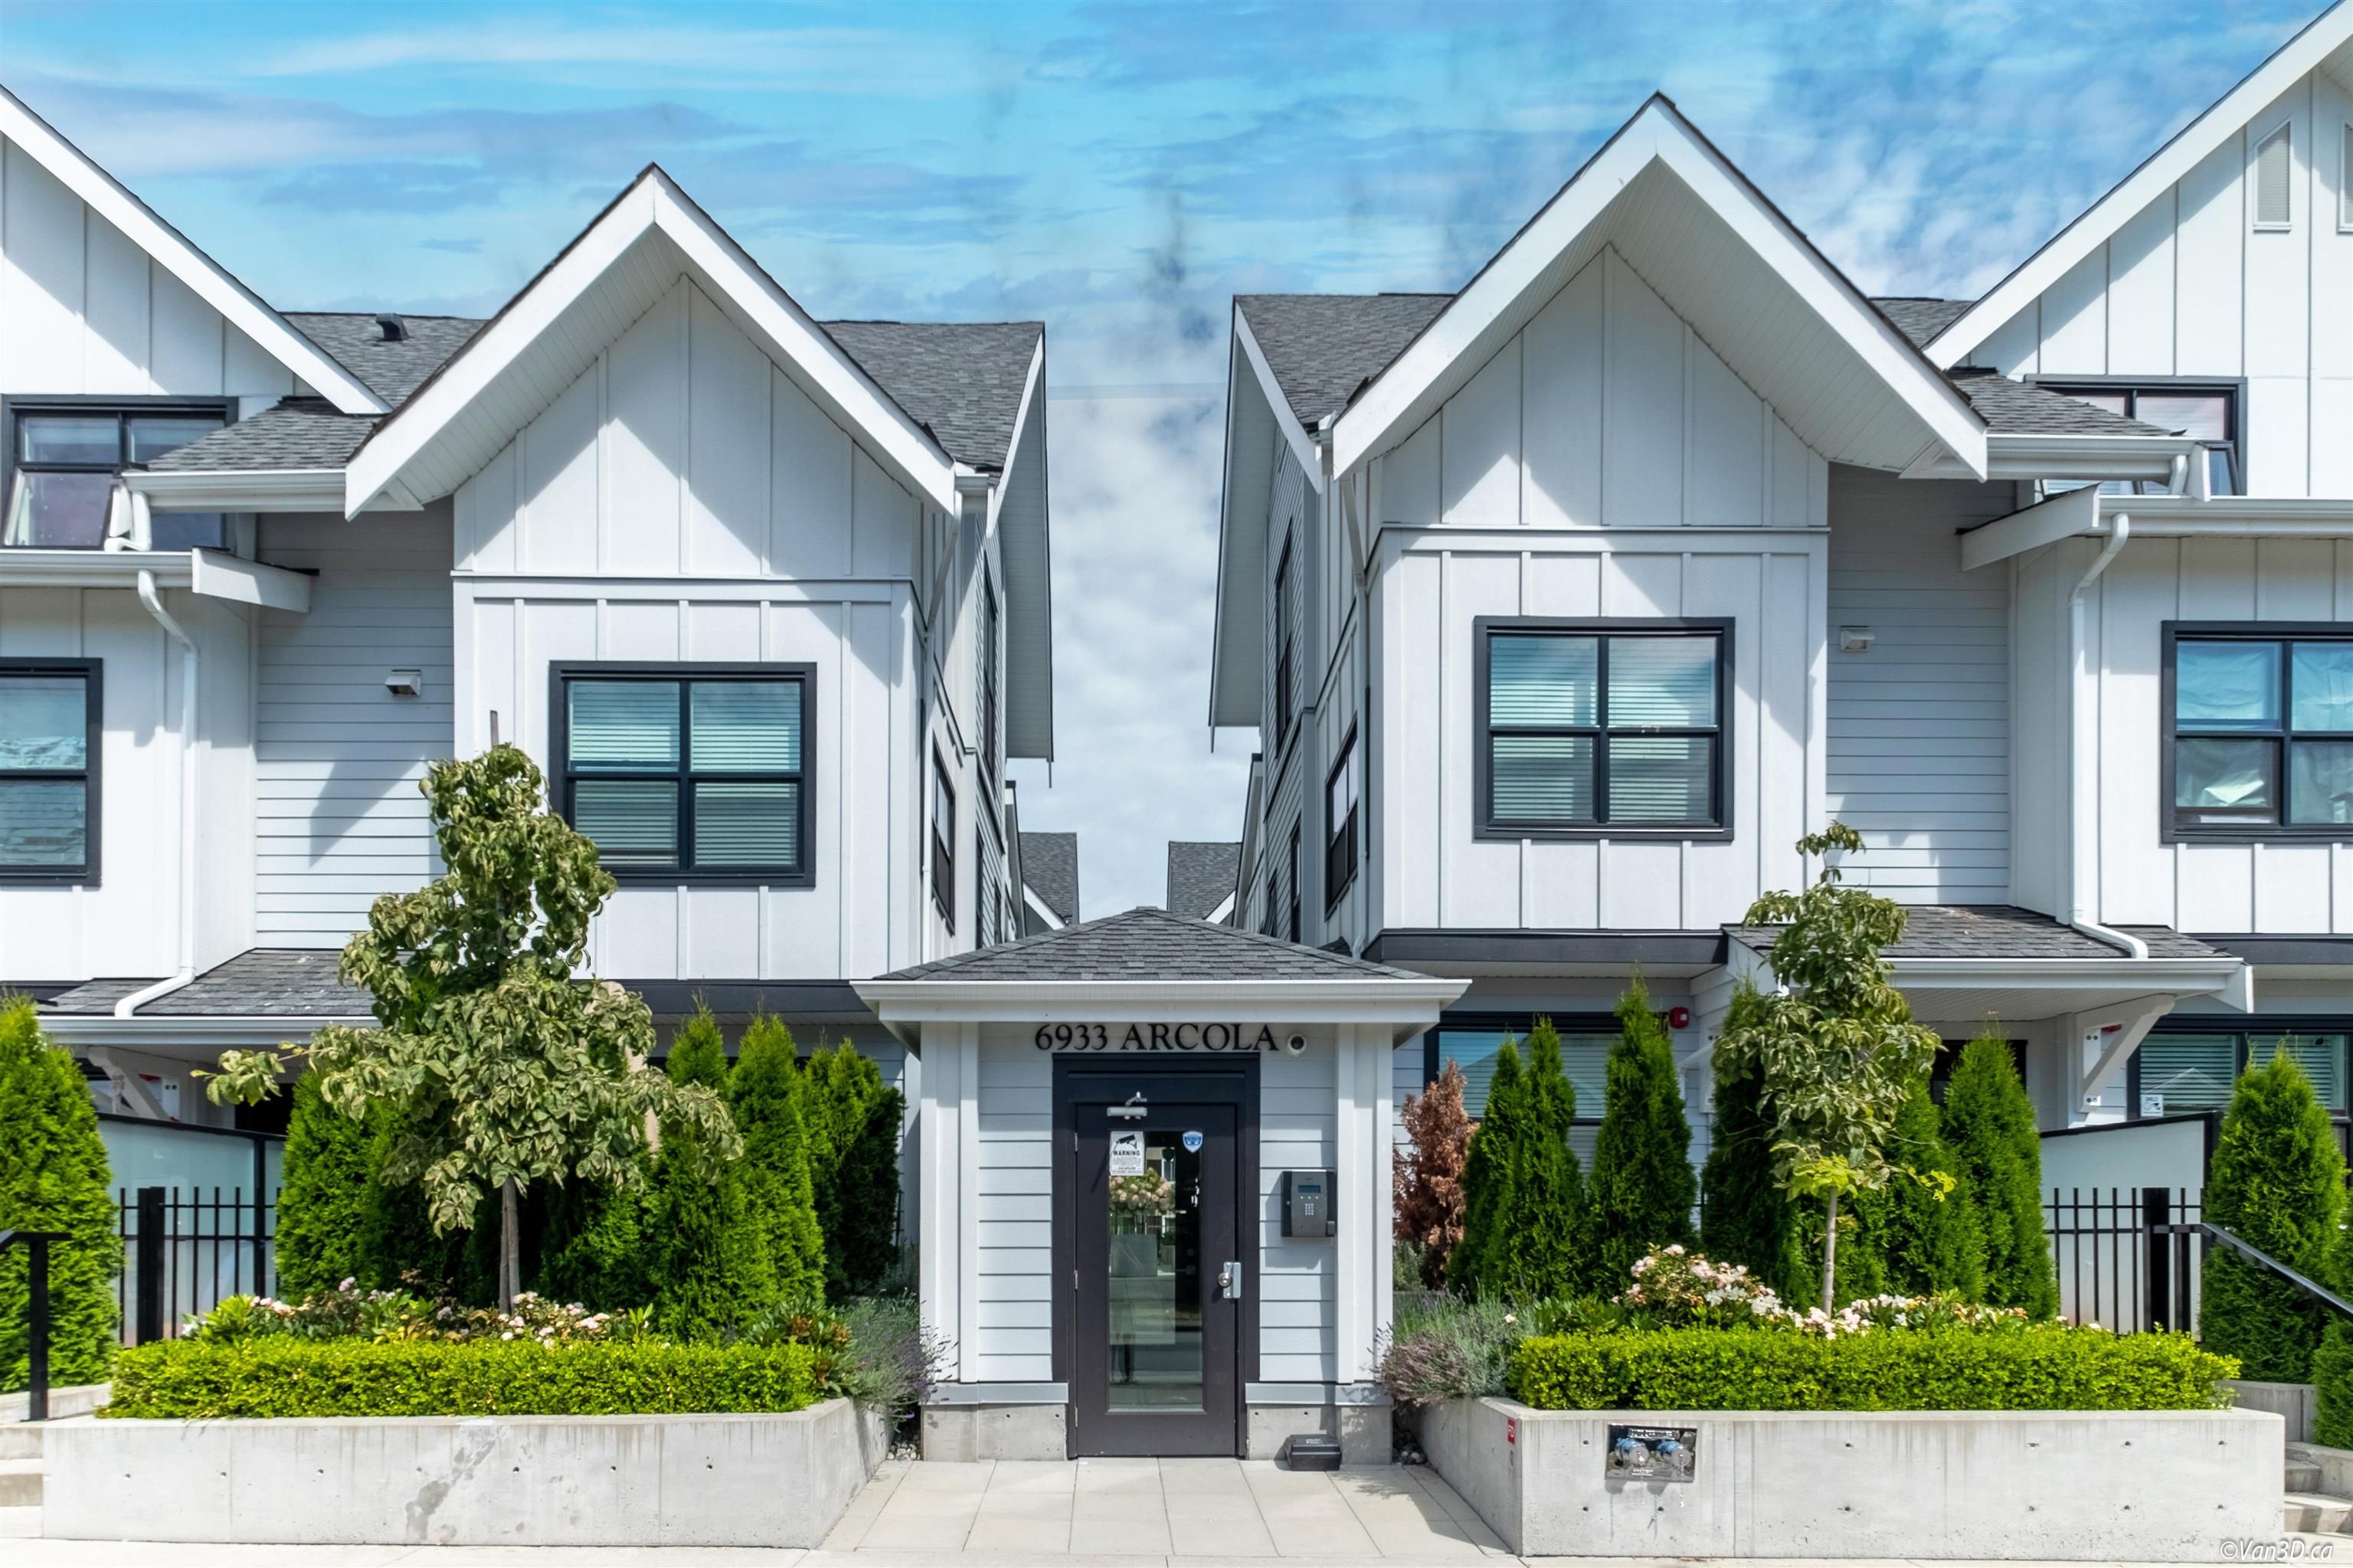 Open House. Open House on Sunday, August 20, 2023 2:00PM - 4:00PM
Beautiful 2yr old spacious 1500 sqft Townhouse with 3 bedrooms, 2 1/2baths plus basement office use or ? This will not last ! Popular Highgate Burnaby location close to everything. This one